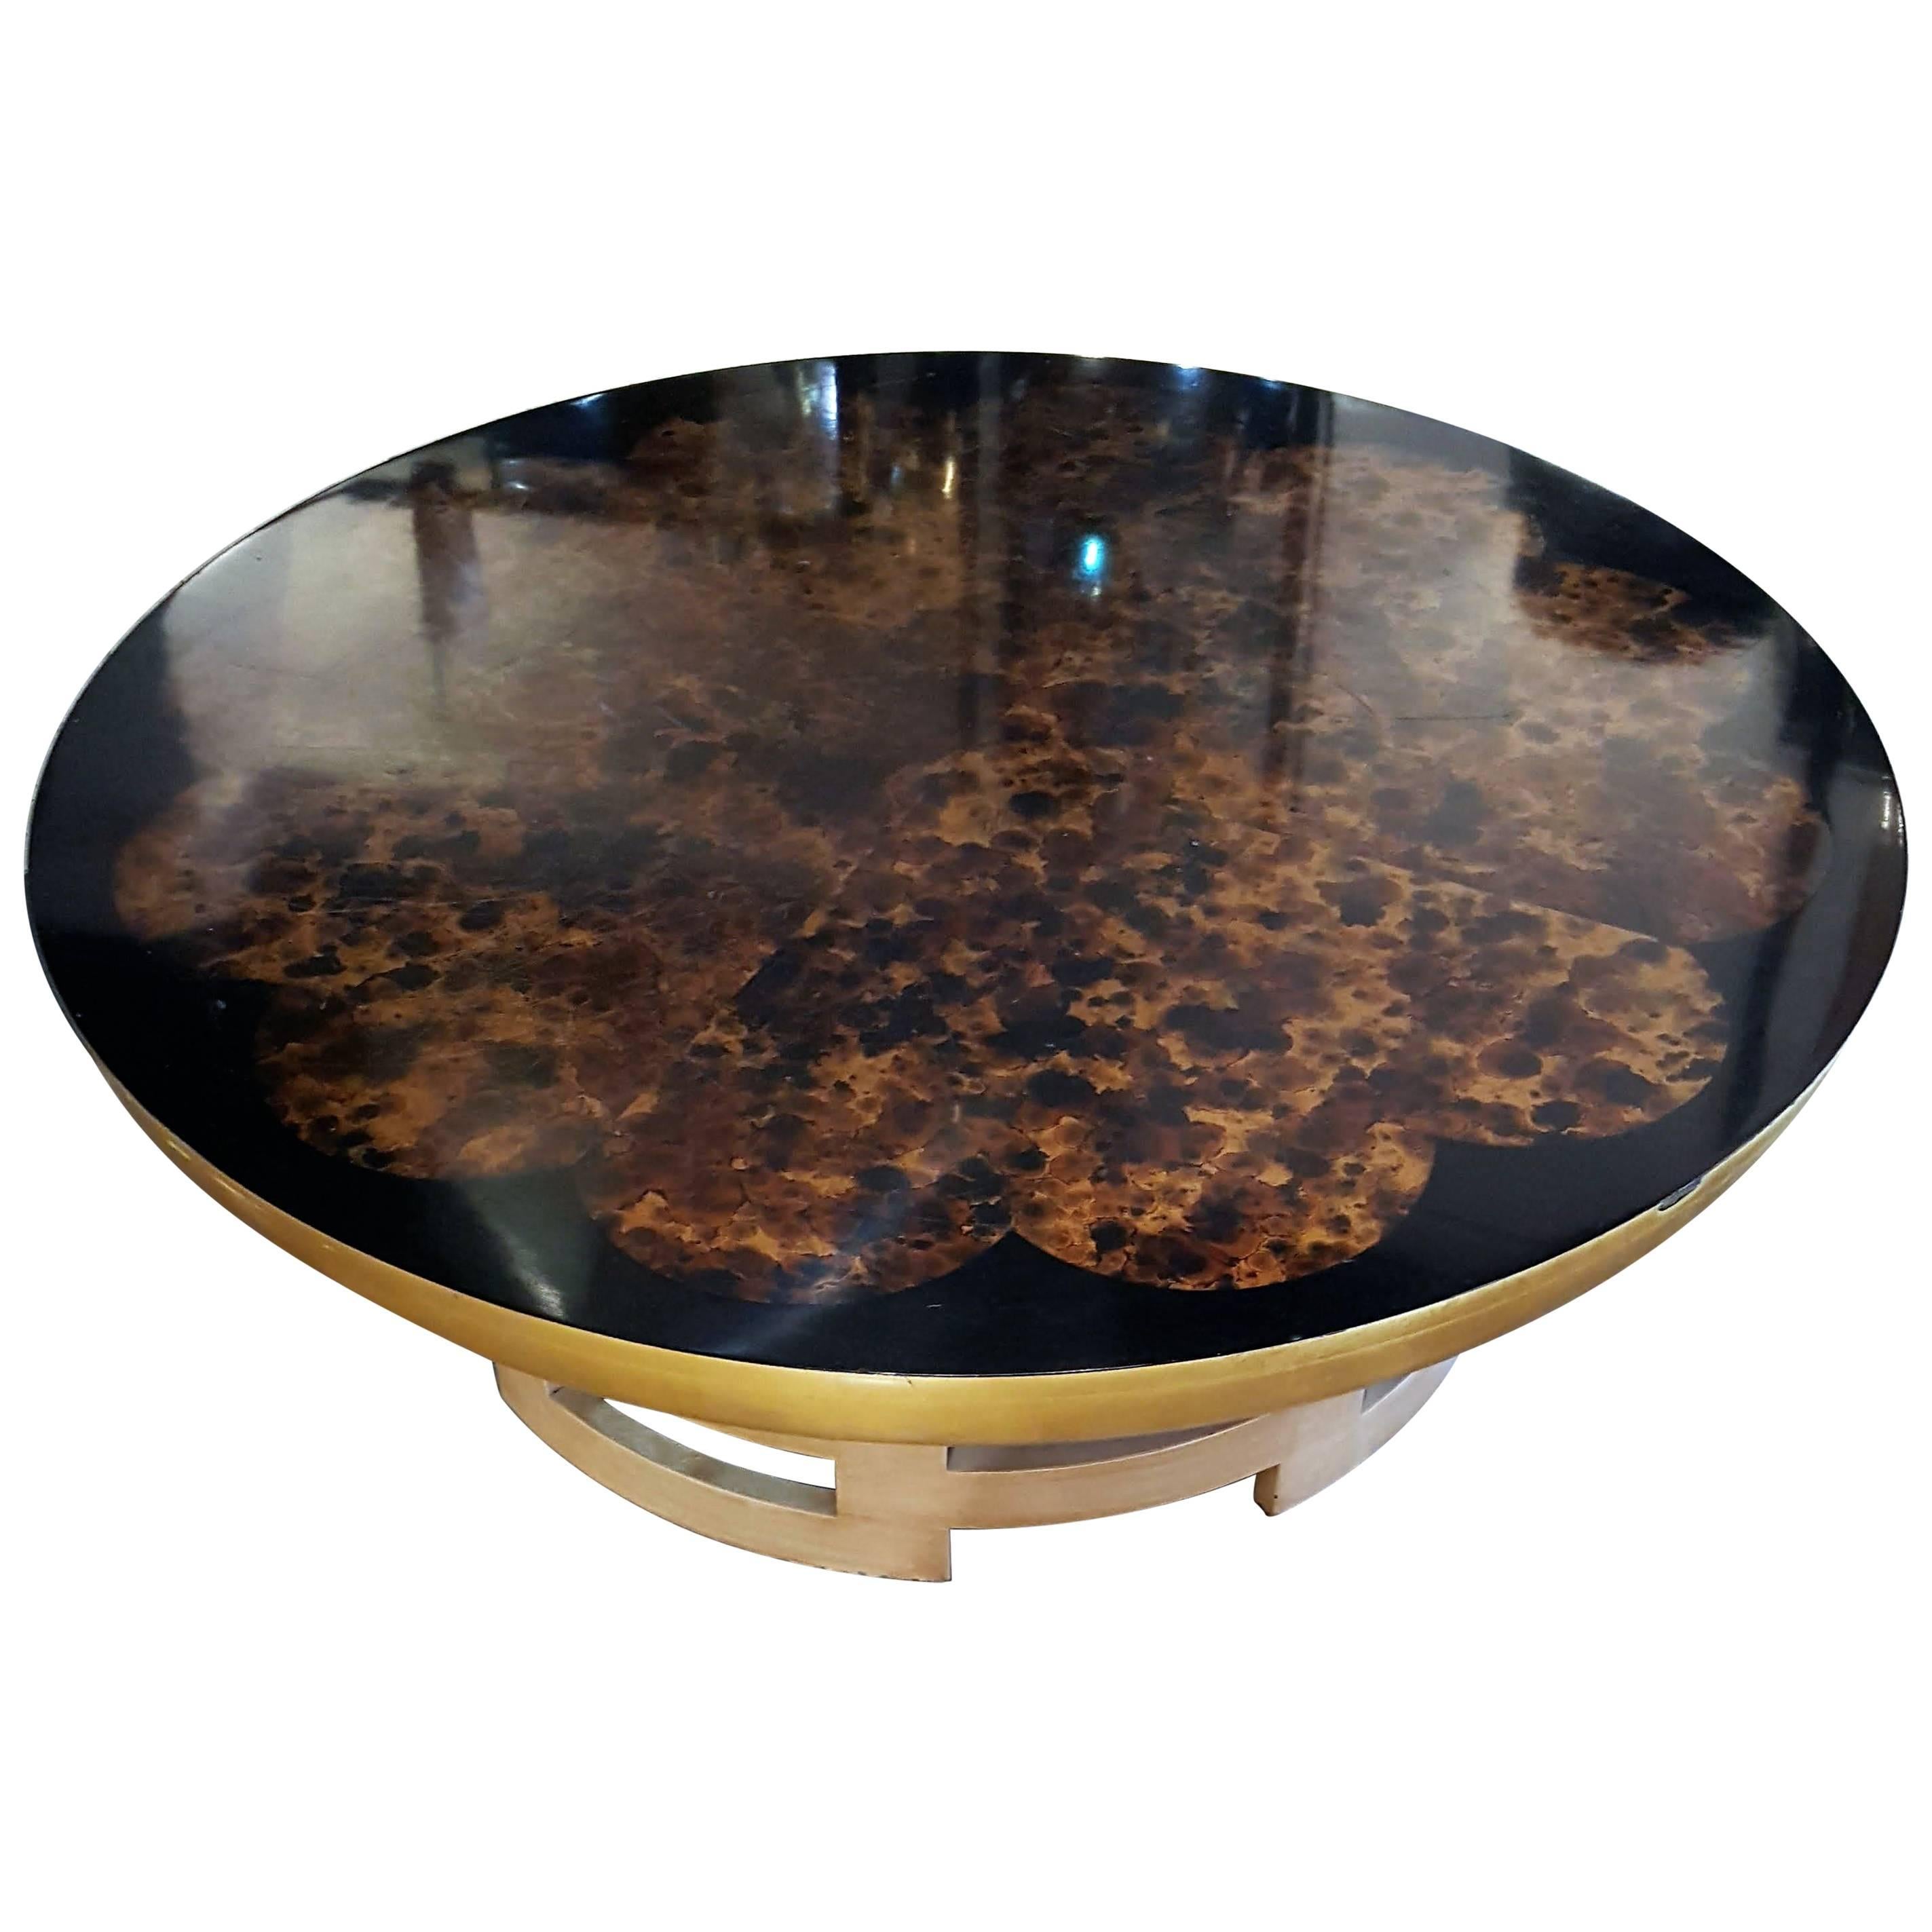 Exquisite Mid-Century Cocktail Table by Kittinger